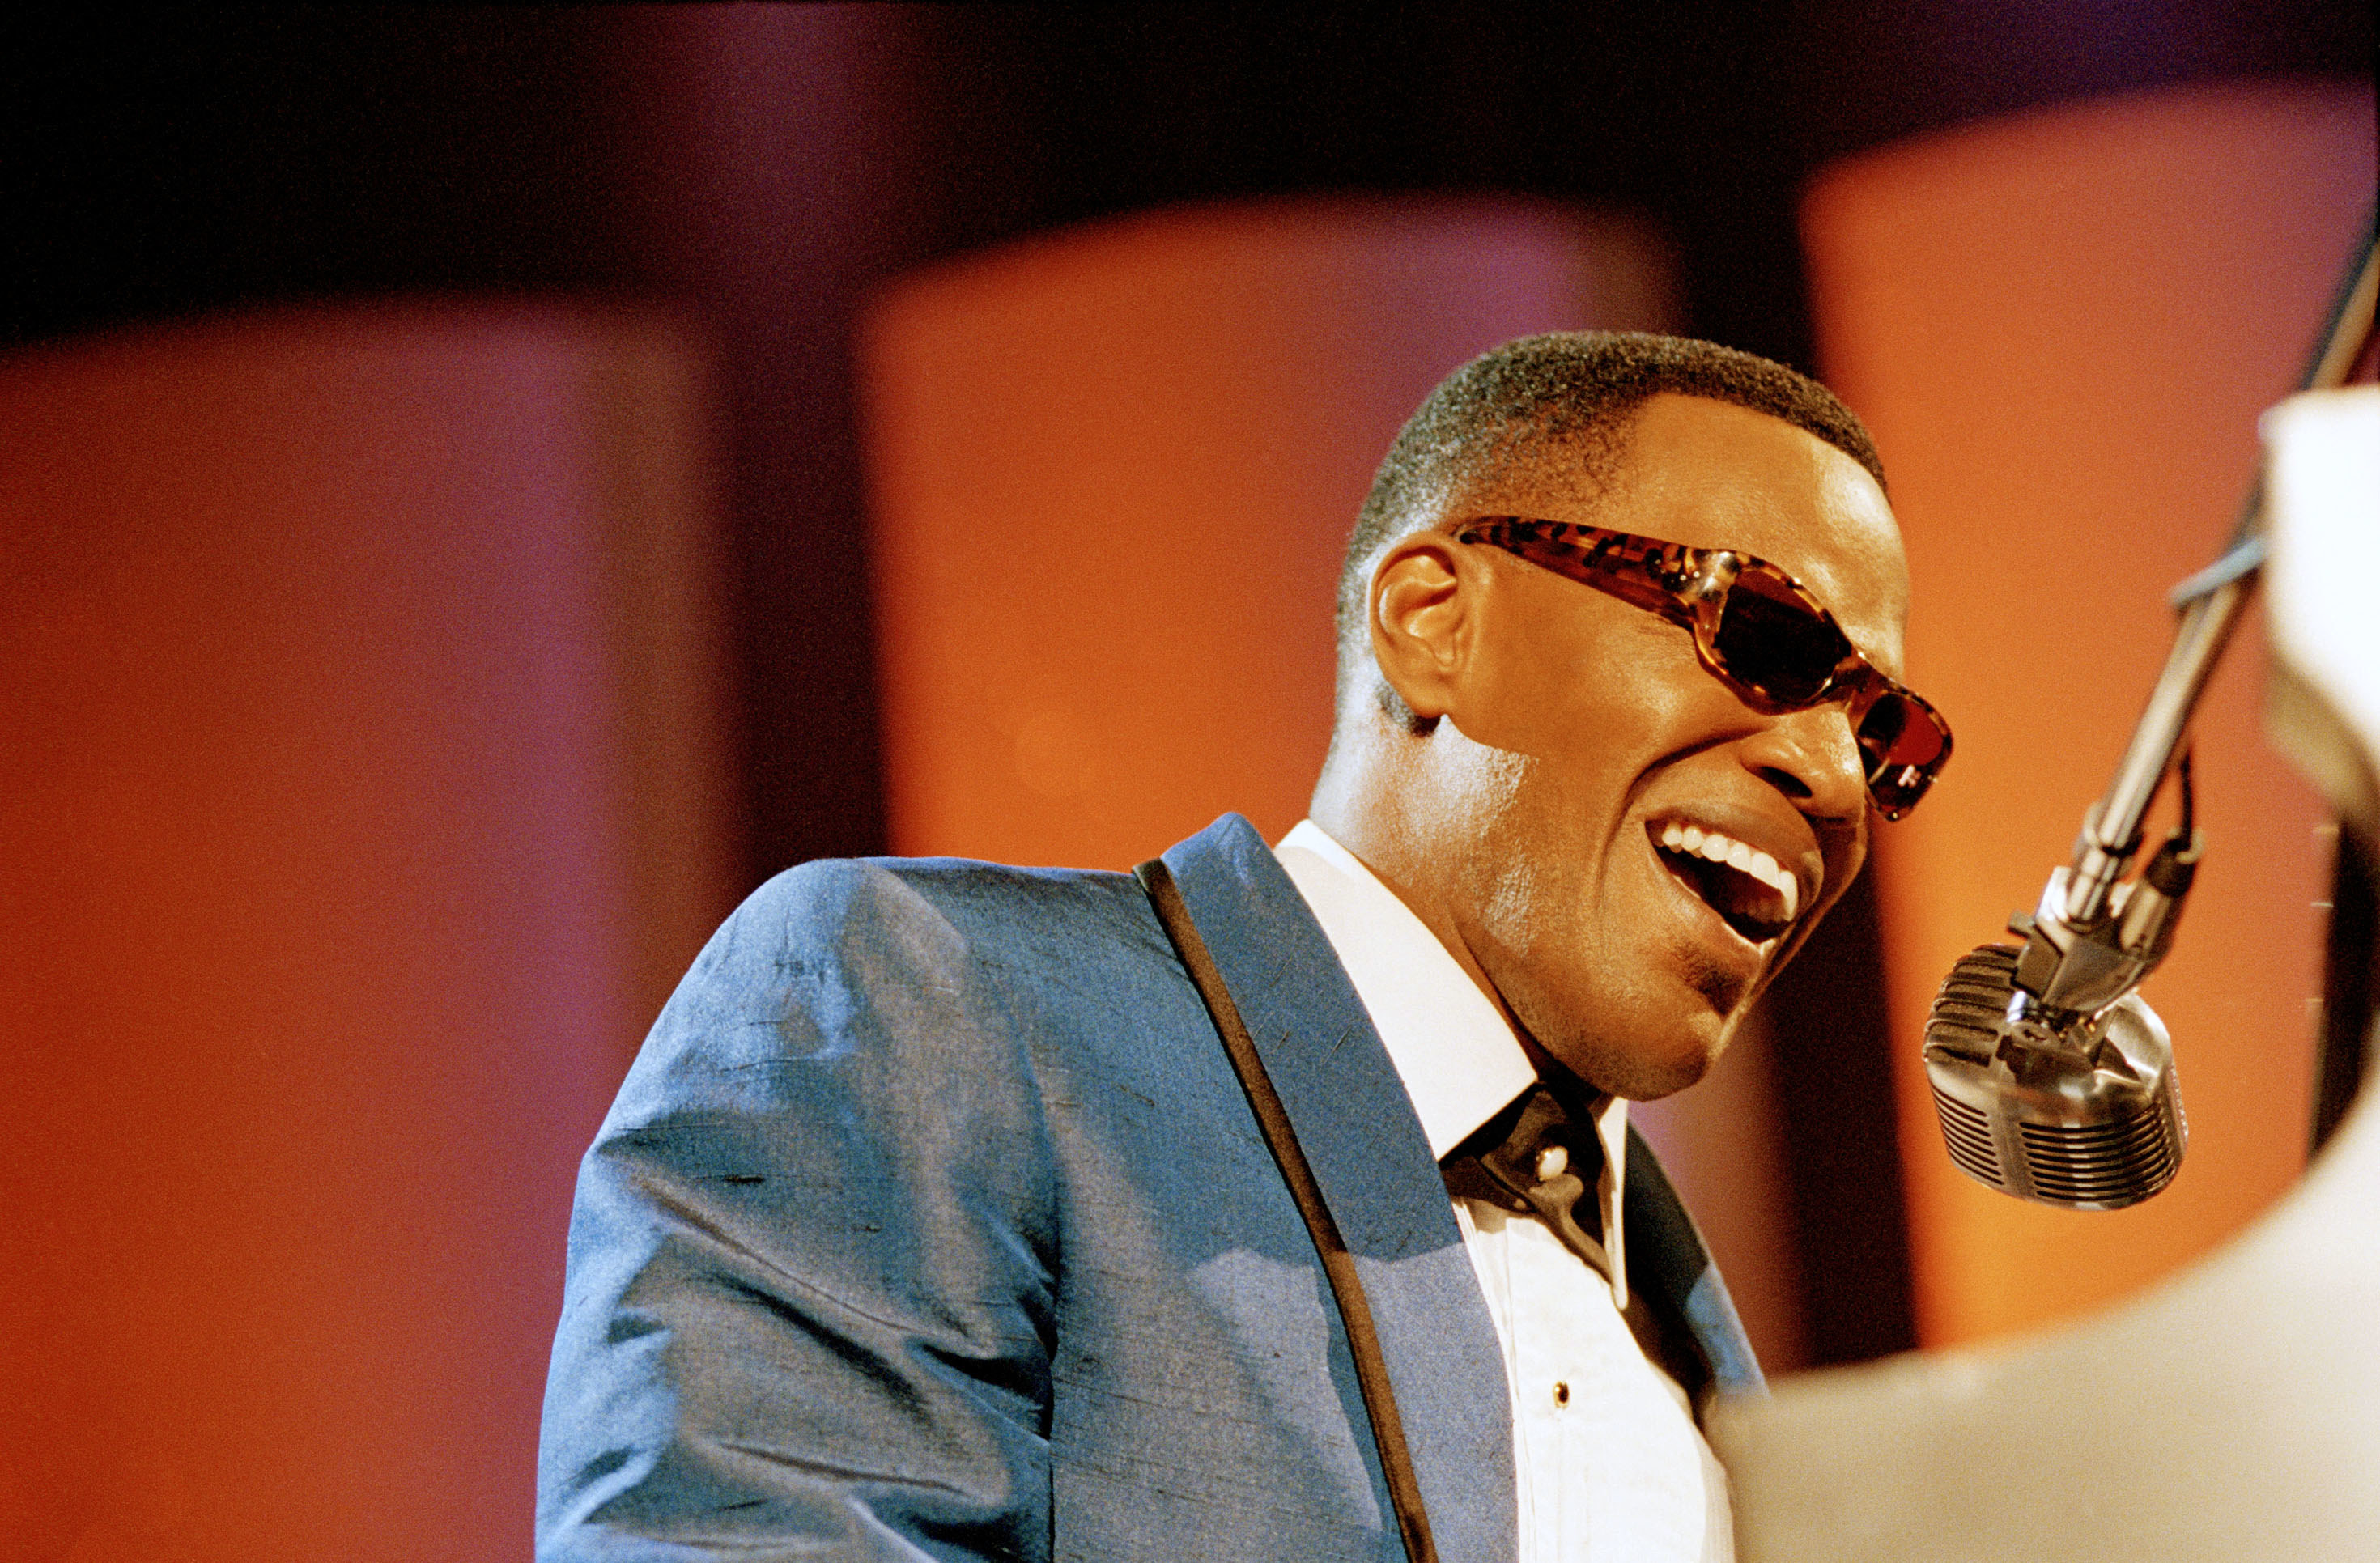 Jamie Foxx as Ray Charles at the piano and microphone